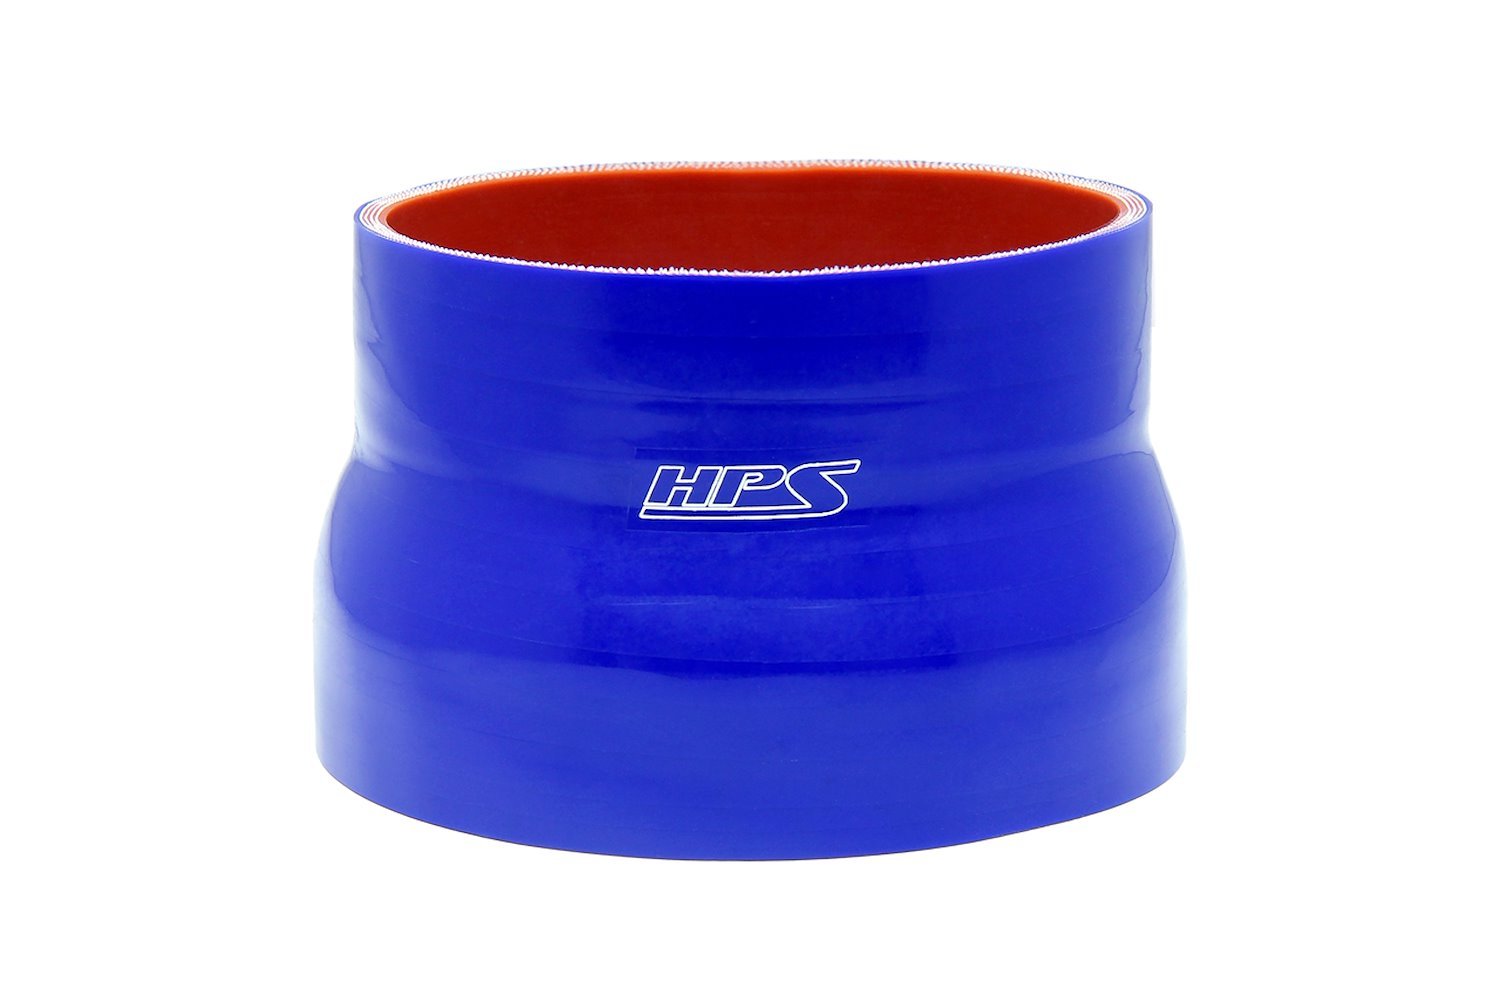 HTSR-450-500-BLUE Silicone Reducer Hose, High-Temp 4-Ply Reinforced, 4-1/2 in. - 5 in. ID, 3 in. Long, Blue